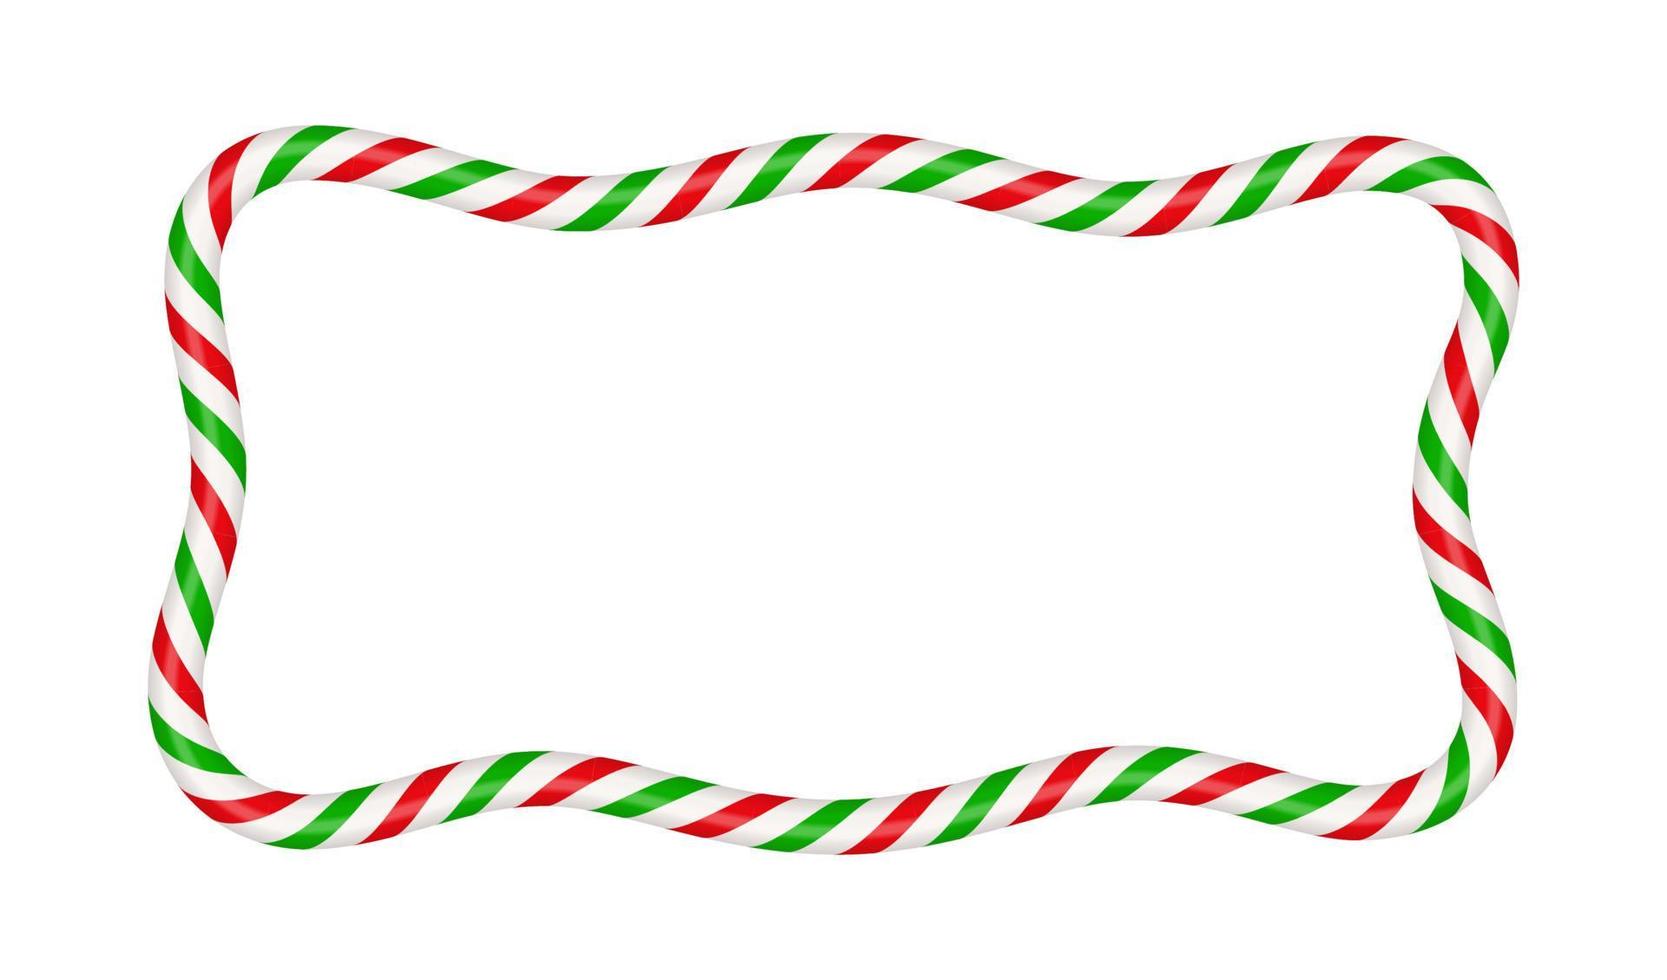 Christmas candy cane rectangle frame with red and green stripe. Xmas border with striped candy lollipop pattern. Blank christmas and new year template. Vector illustration isolate on white background